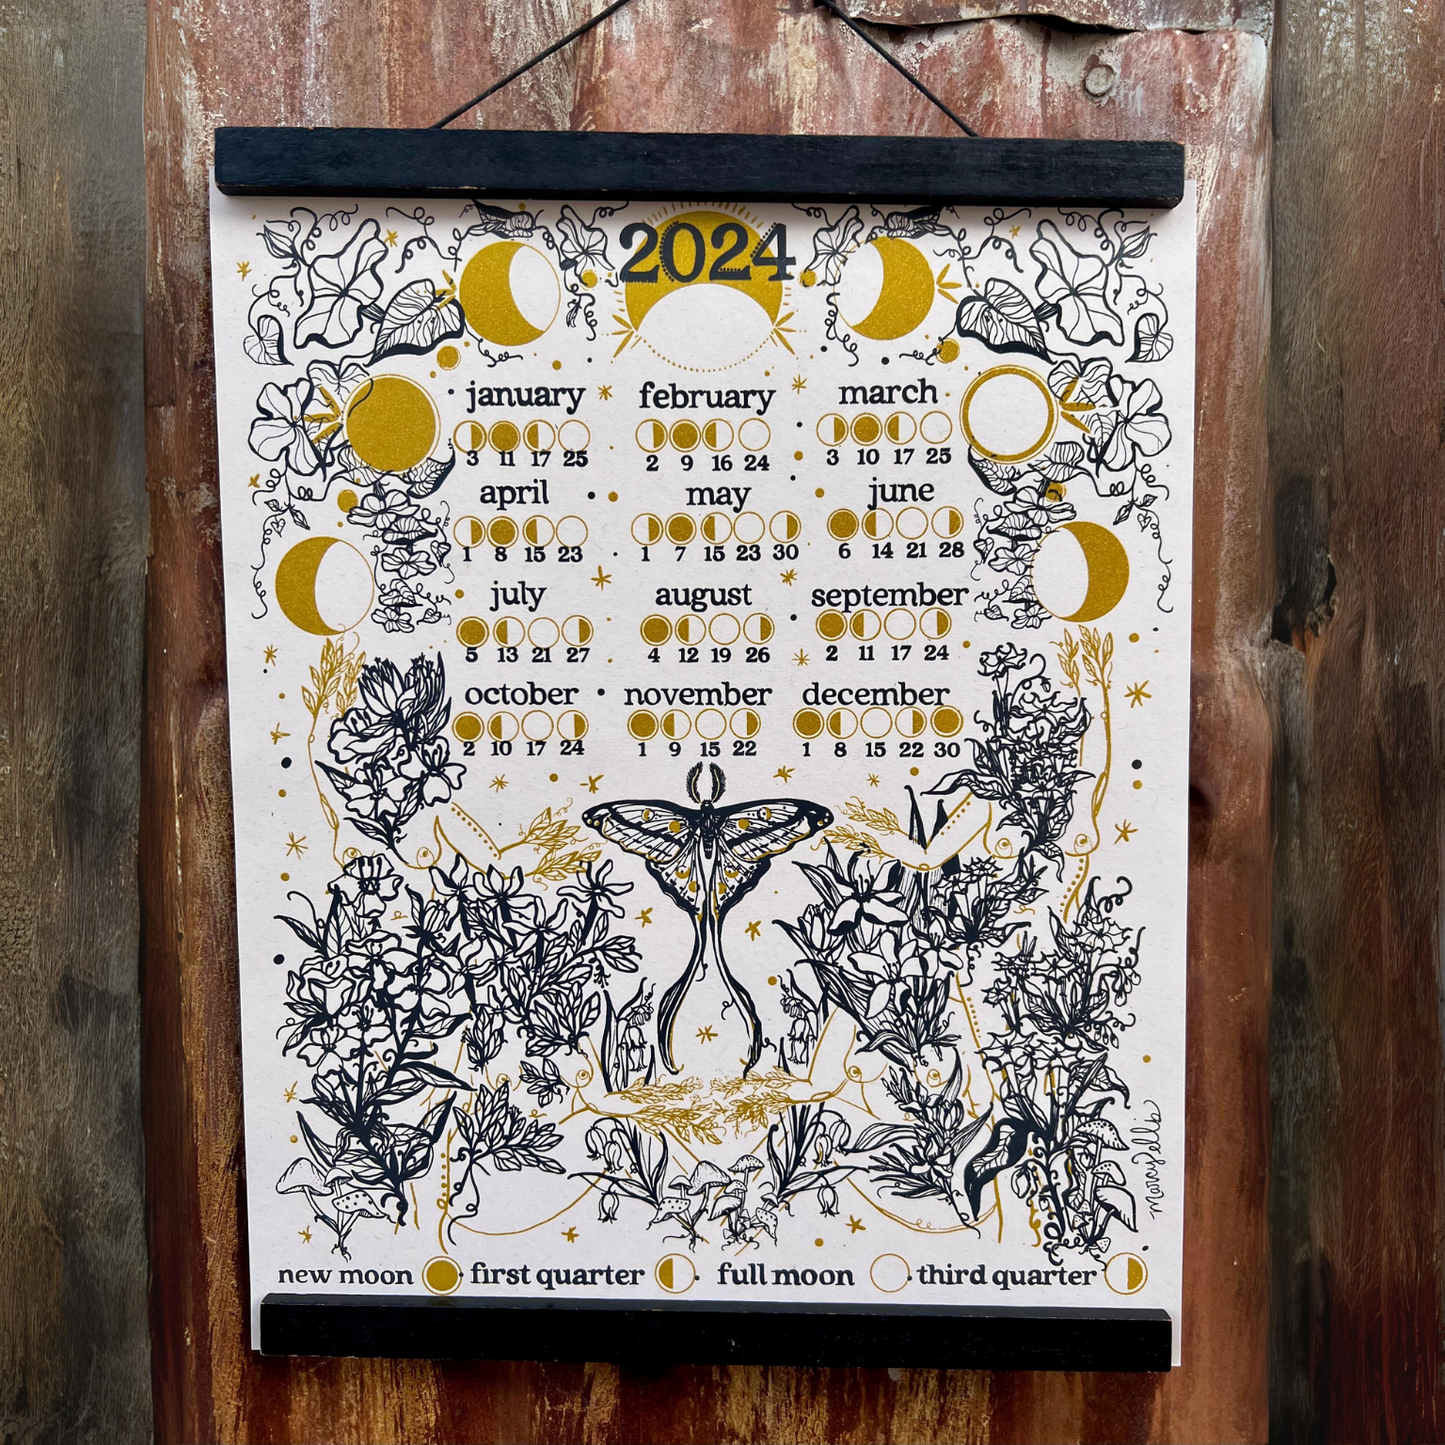 white 2024 moon phase calendar displayed on wall